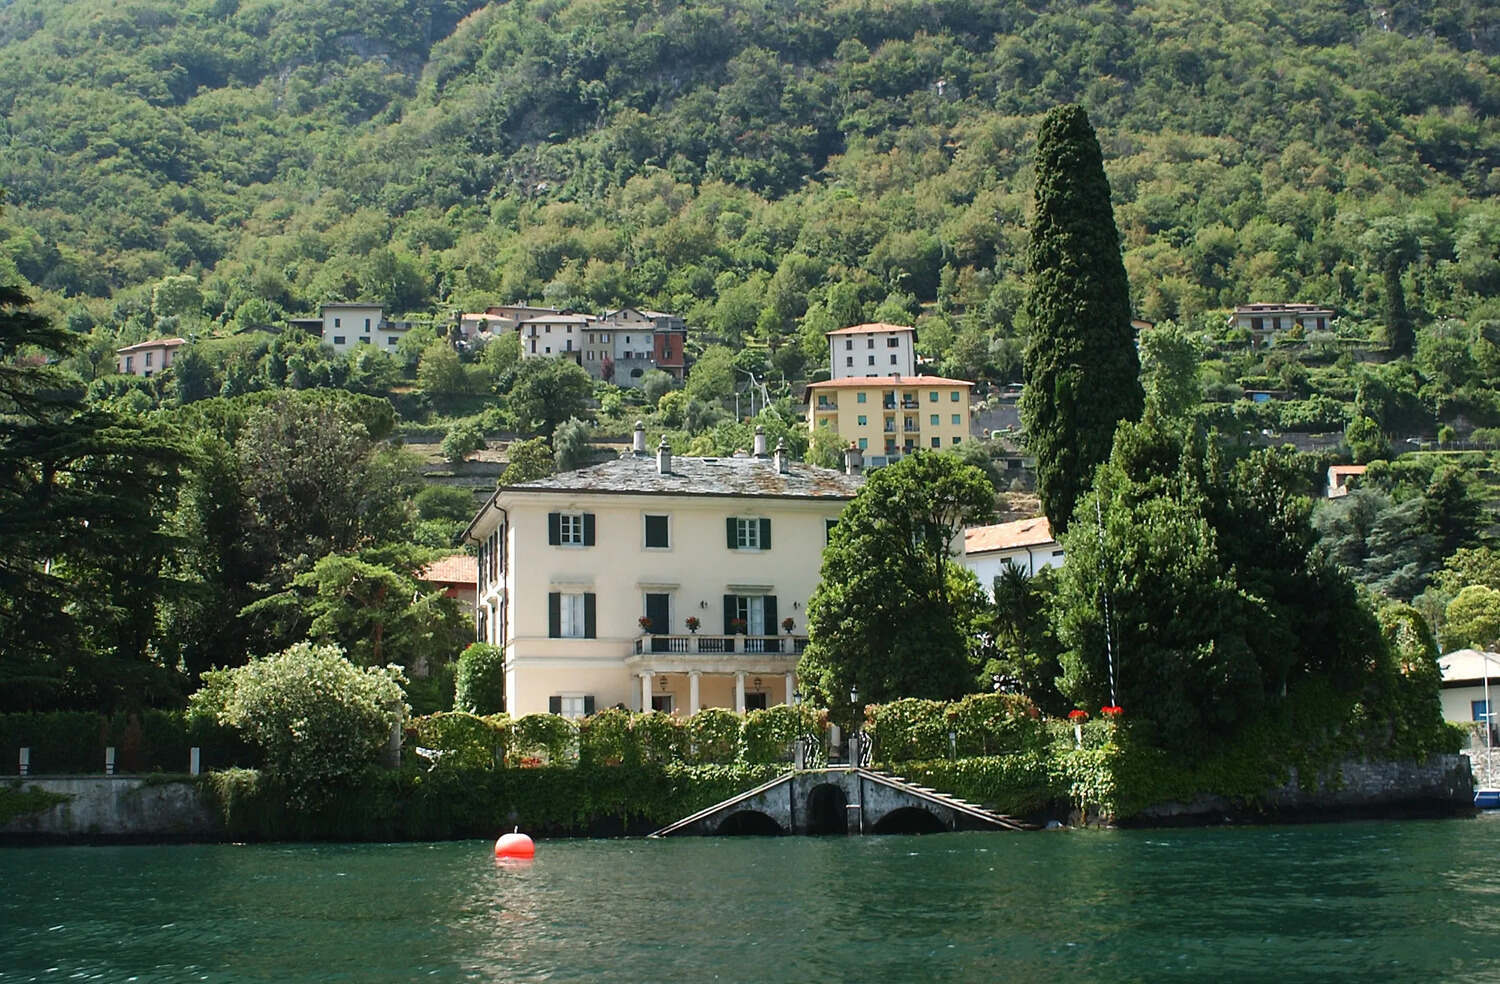 George Clooney’s Lakeside Italian Villa Up For Sale